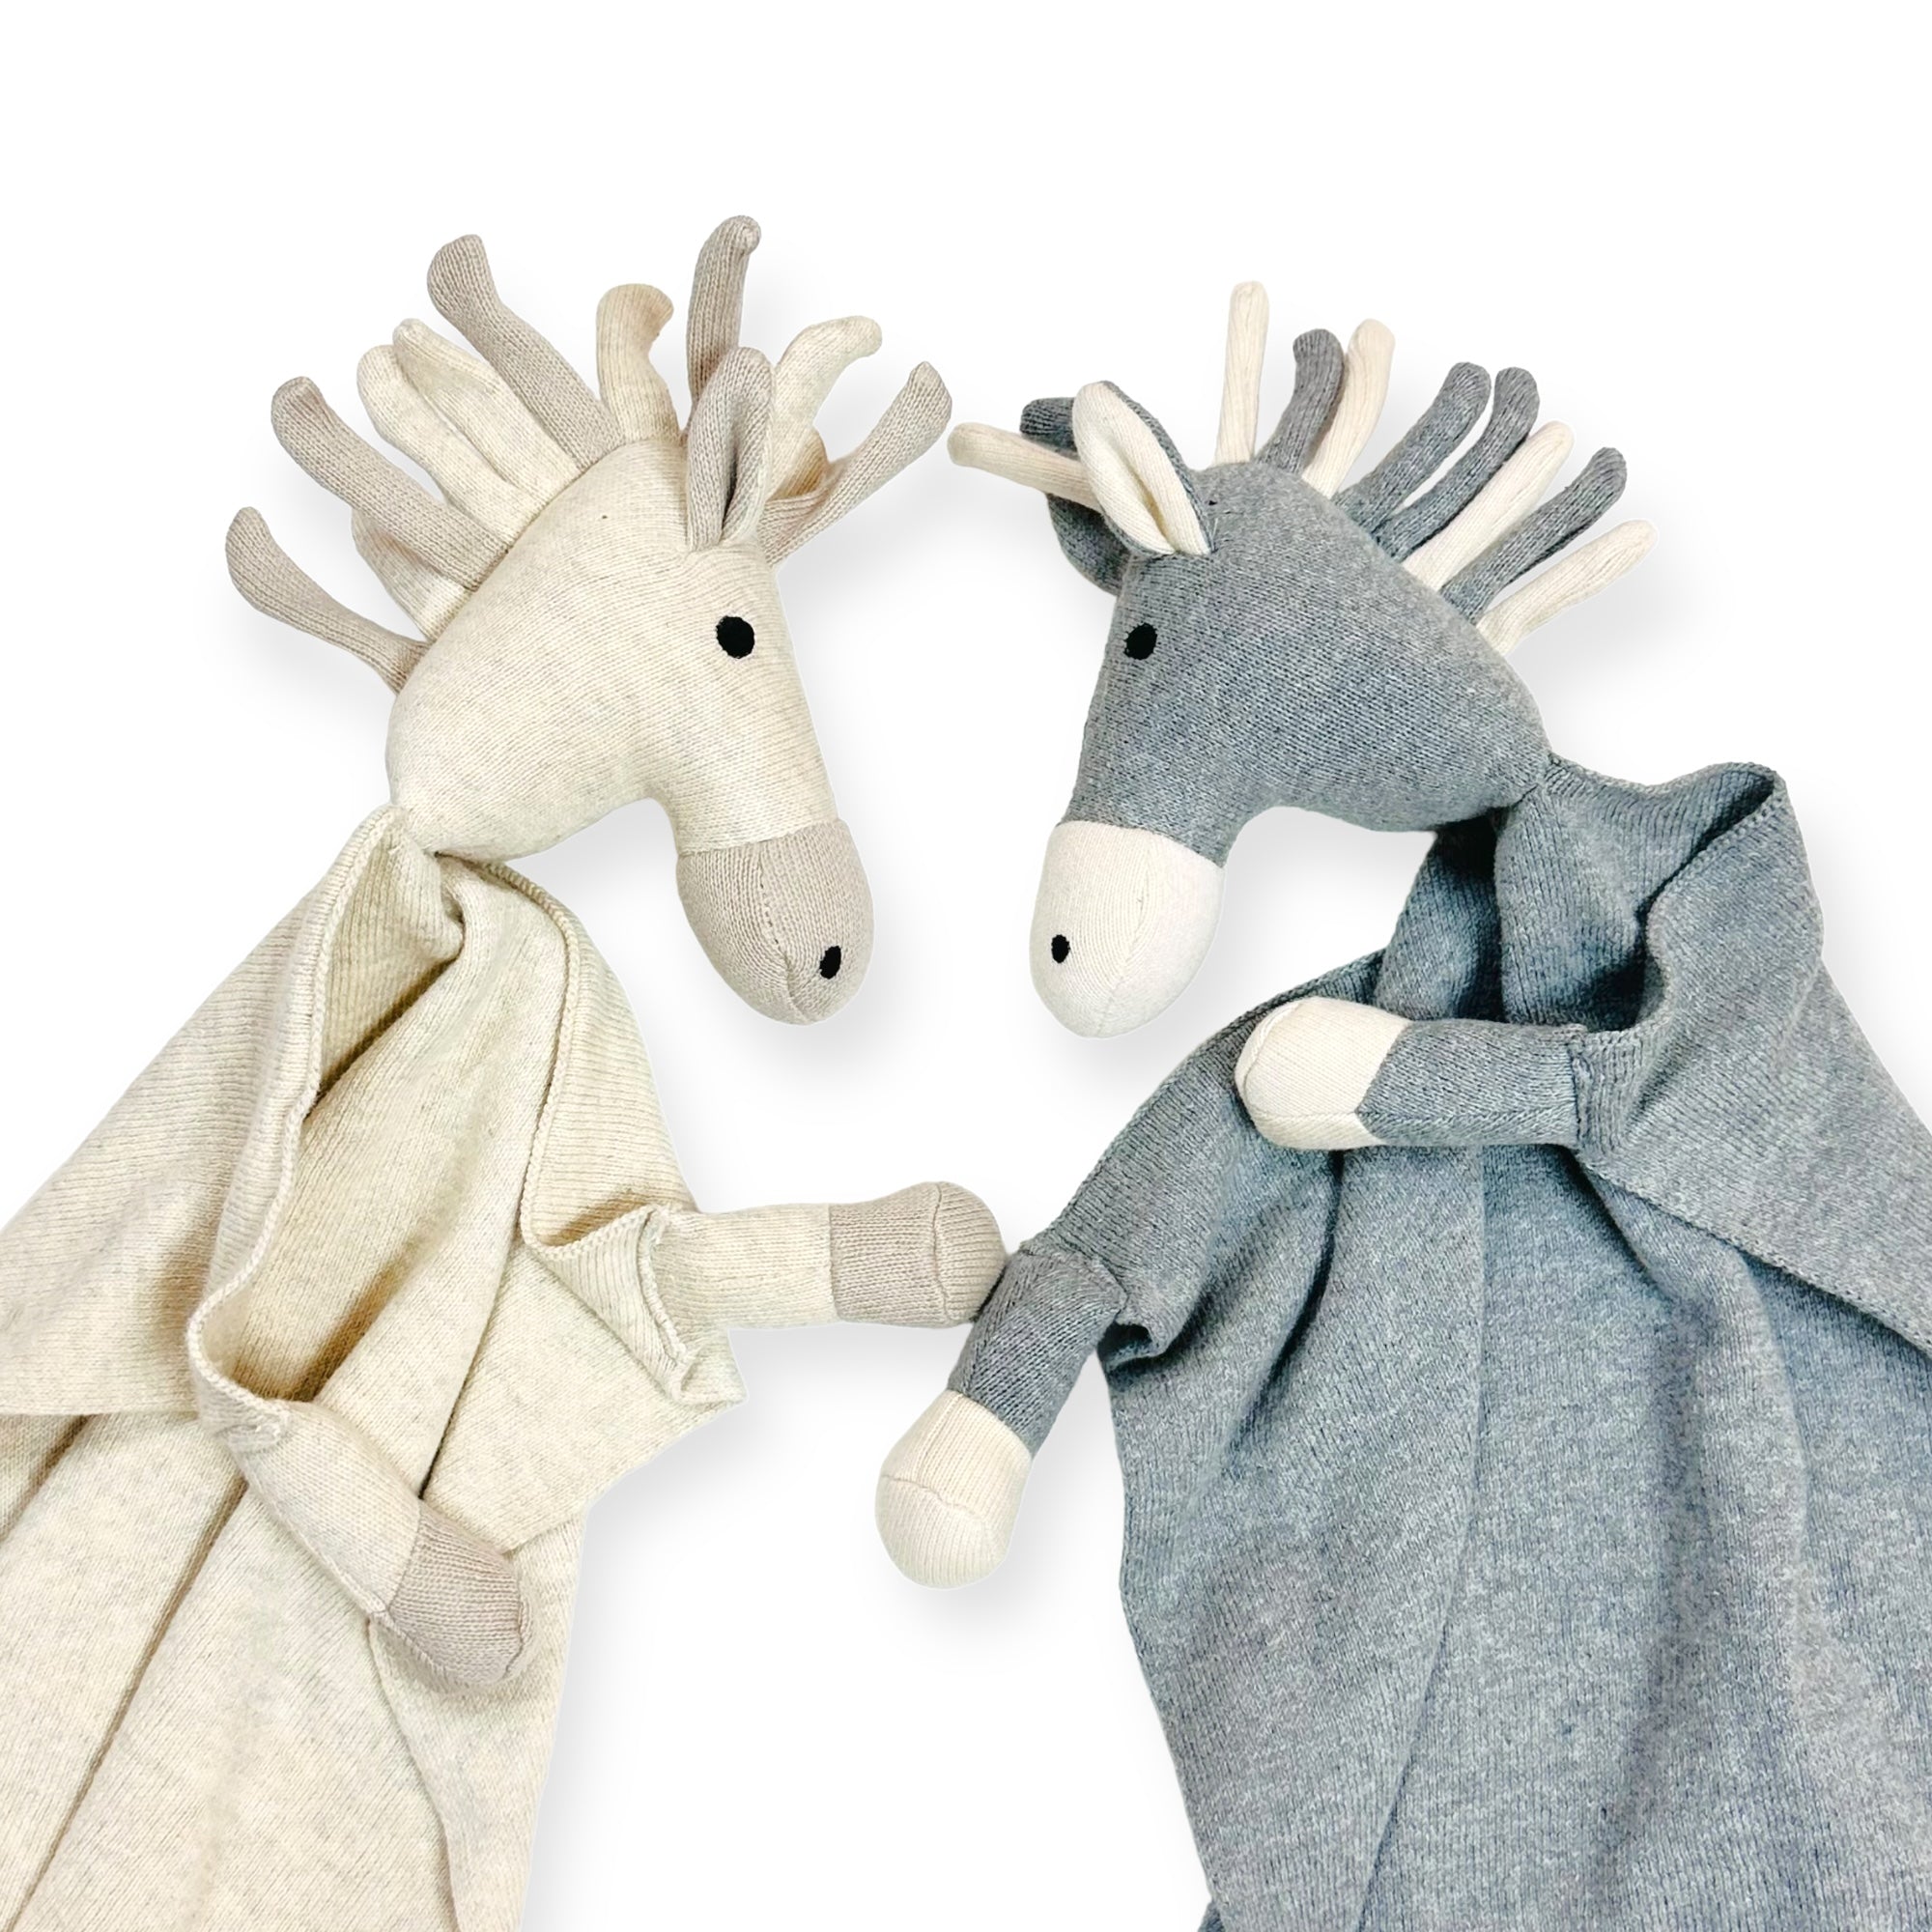 Horse - Organic Baby Lovey Security Blanket Cuddle Cloth  - 2 Colors